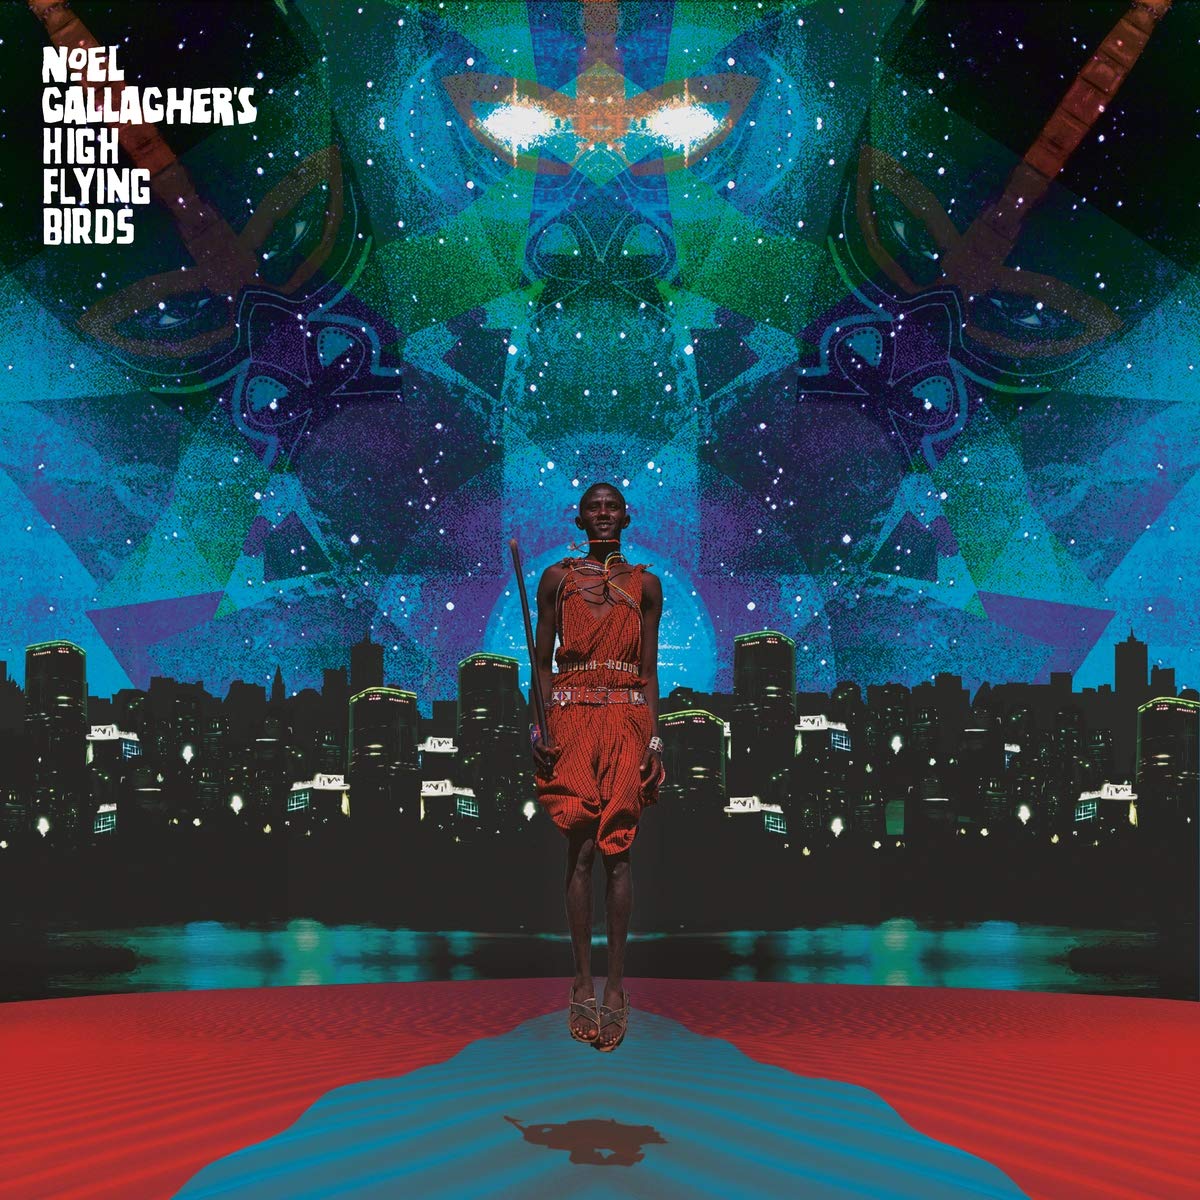 Noel Gallagher's High Flying Birds - This Is The Place EP